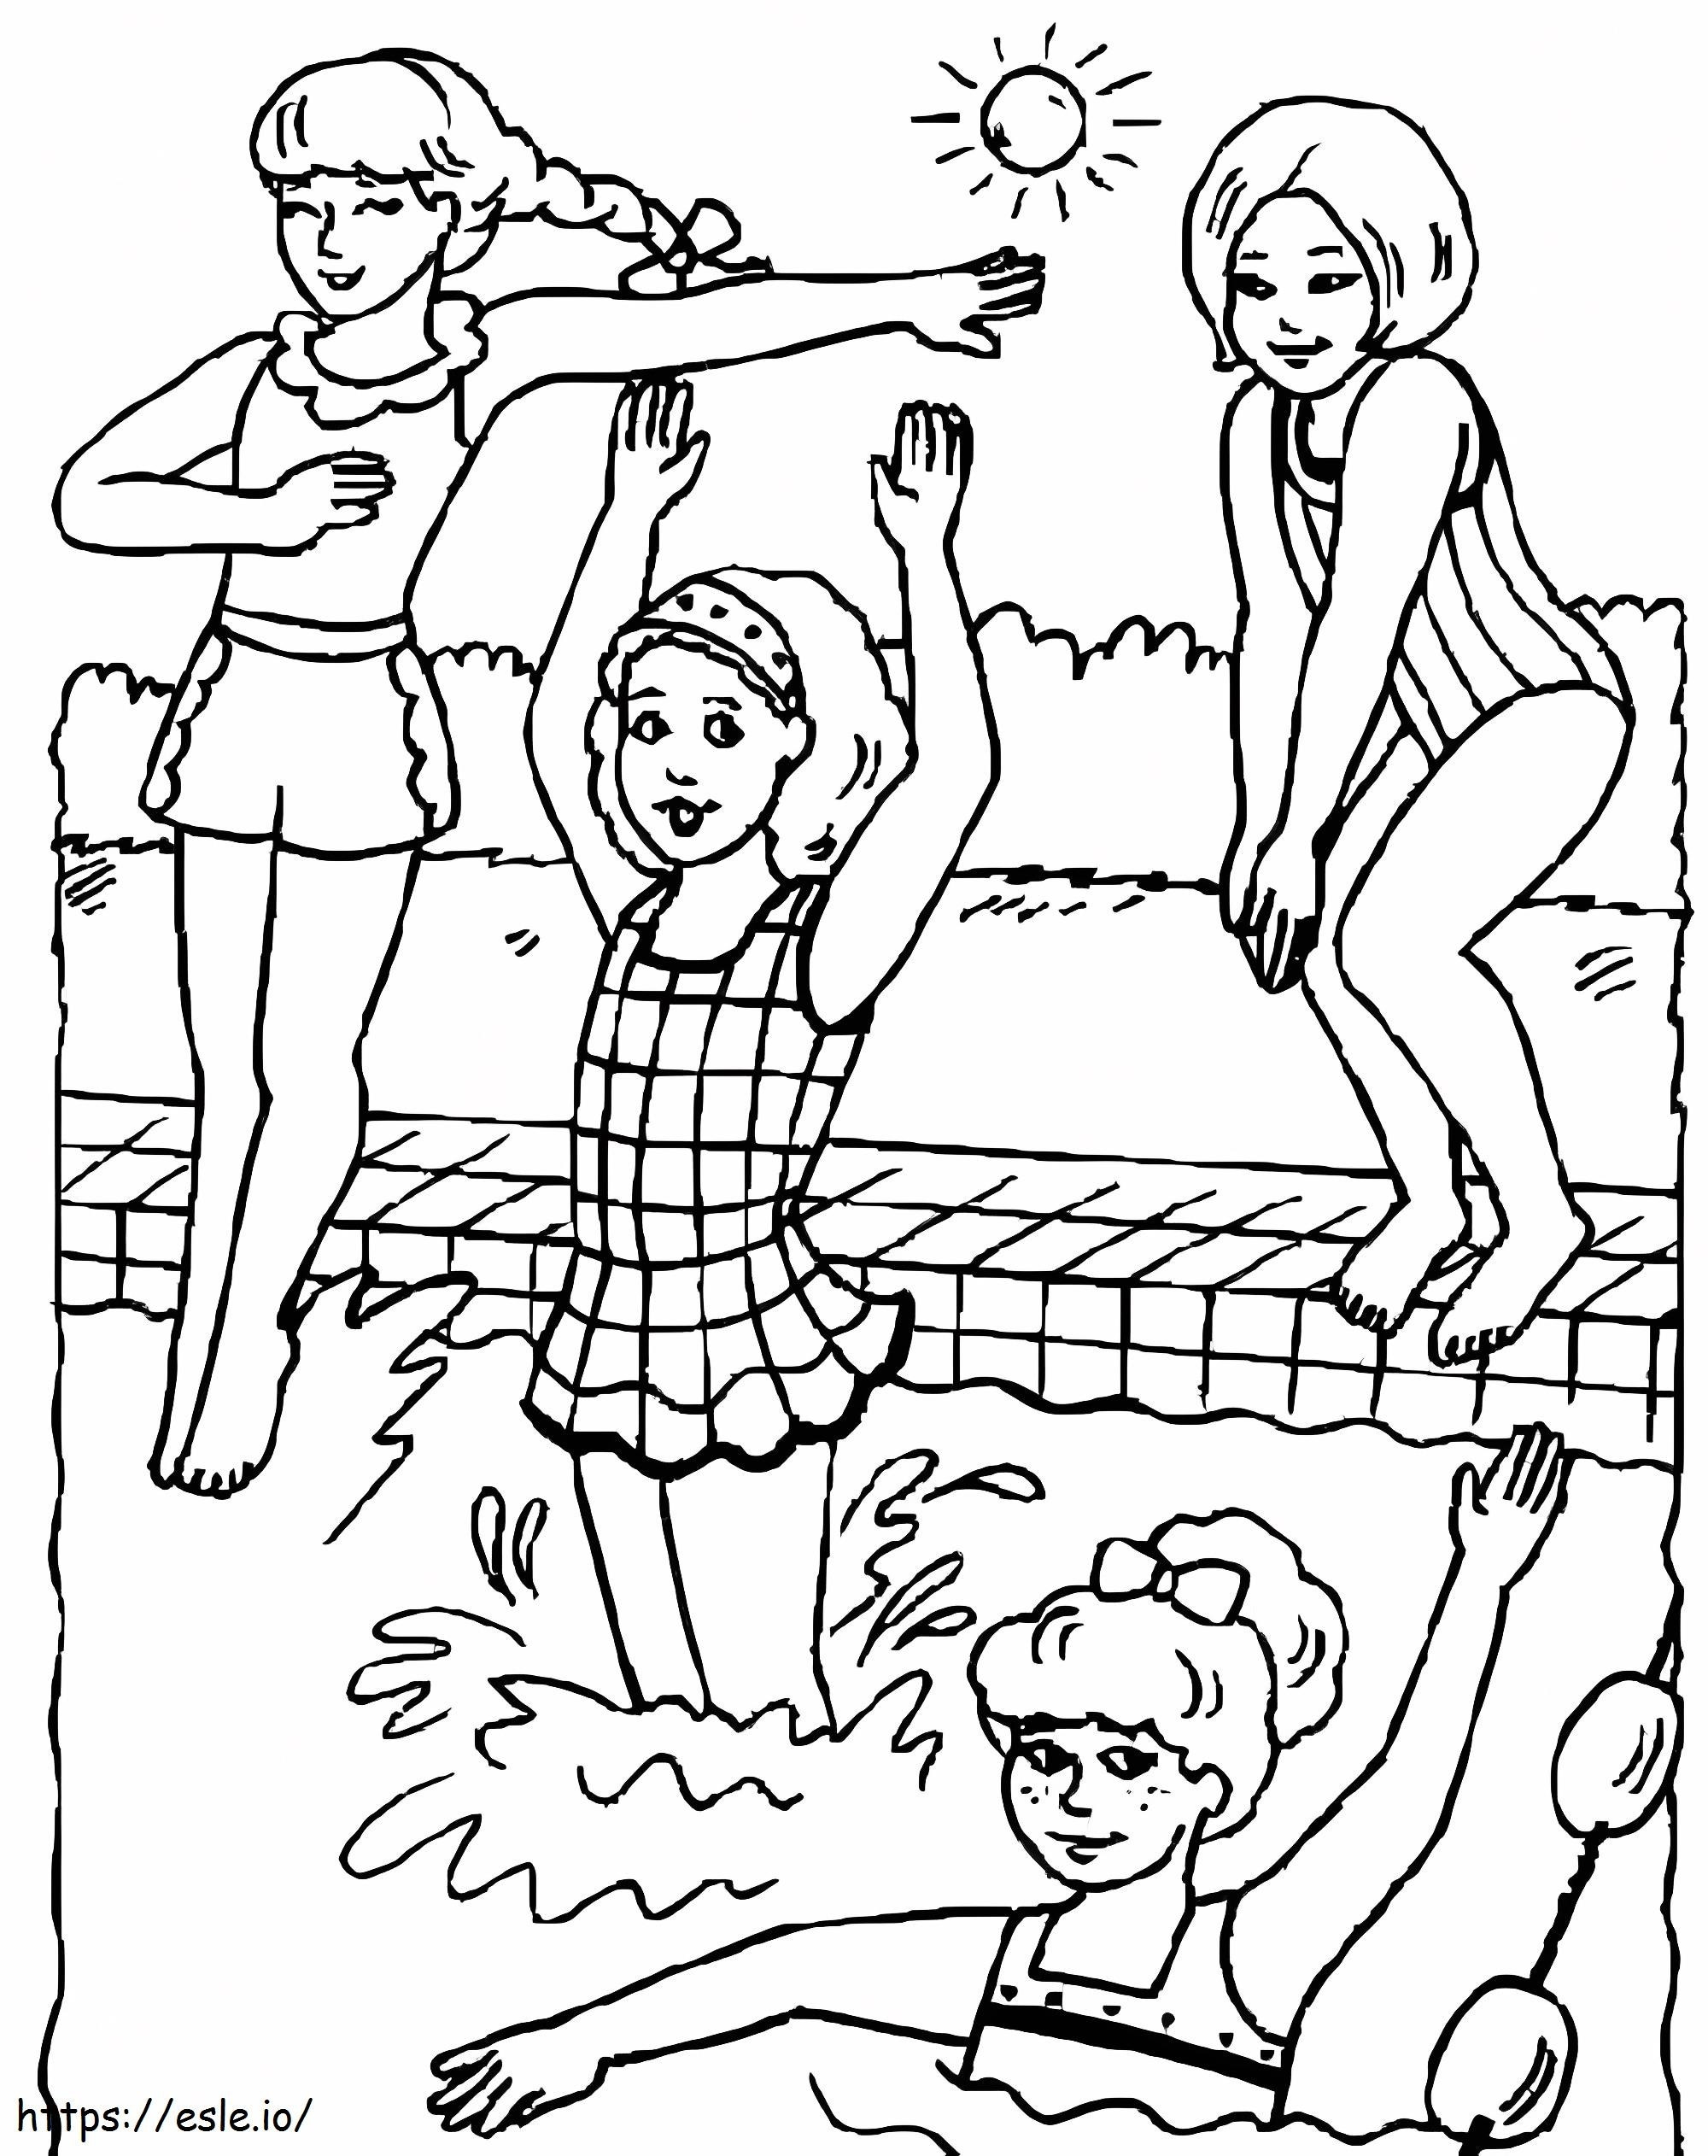 Summer Pool Party coloring page